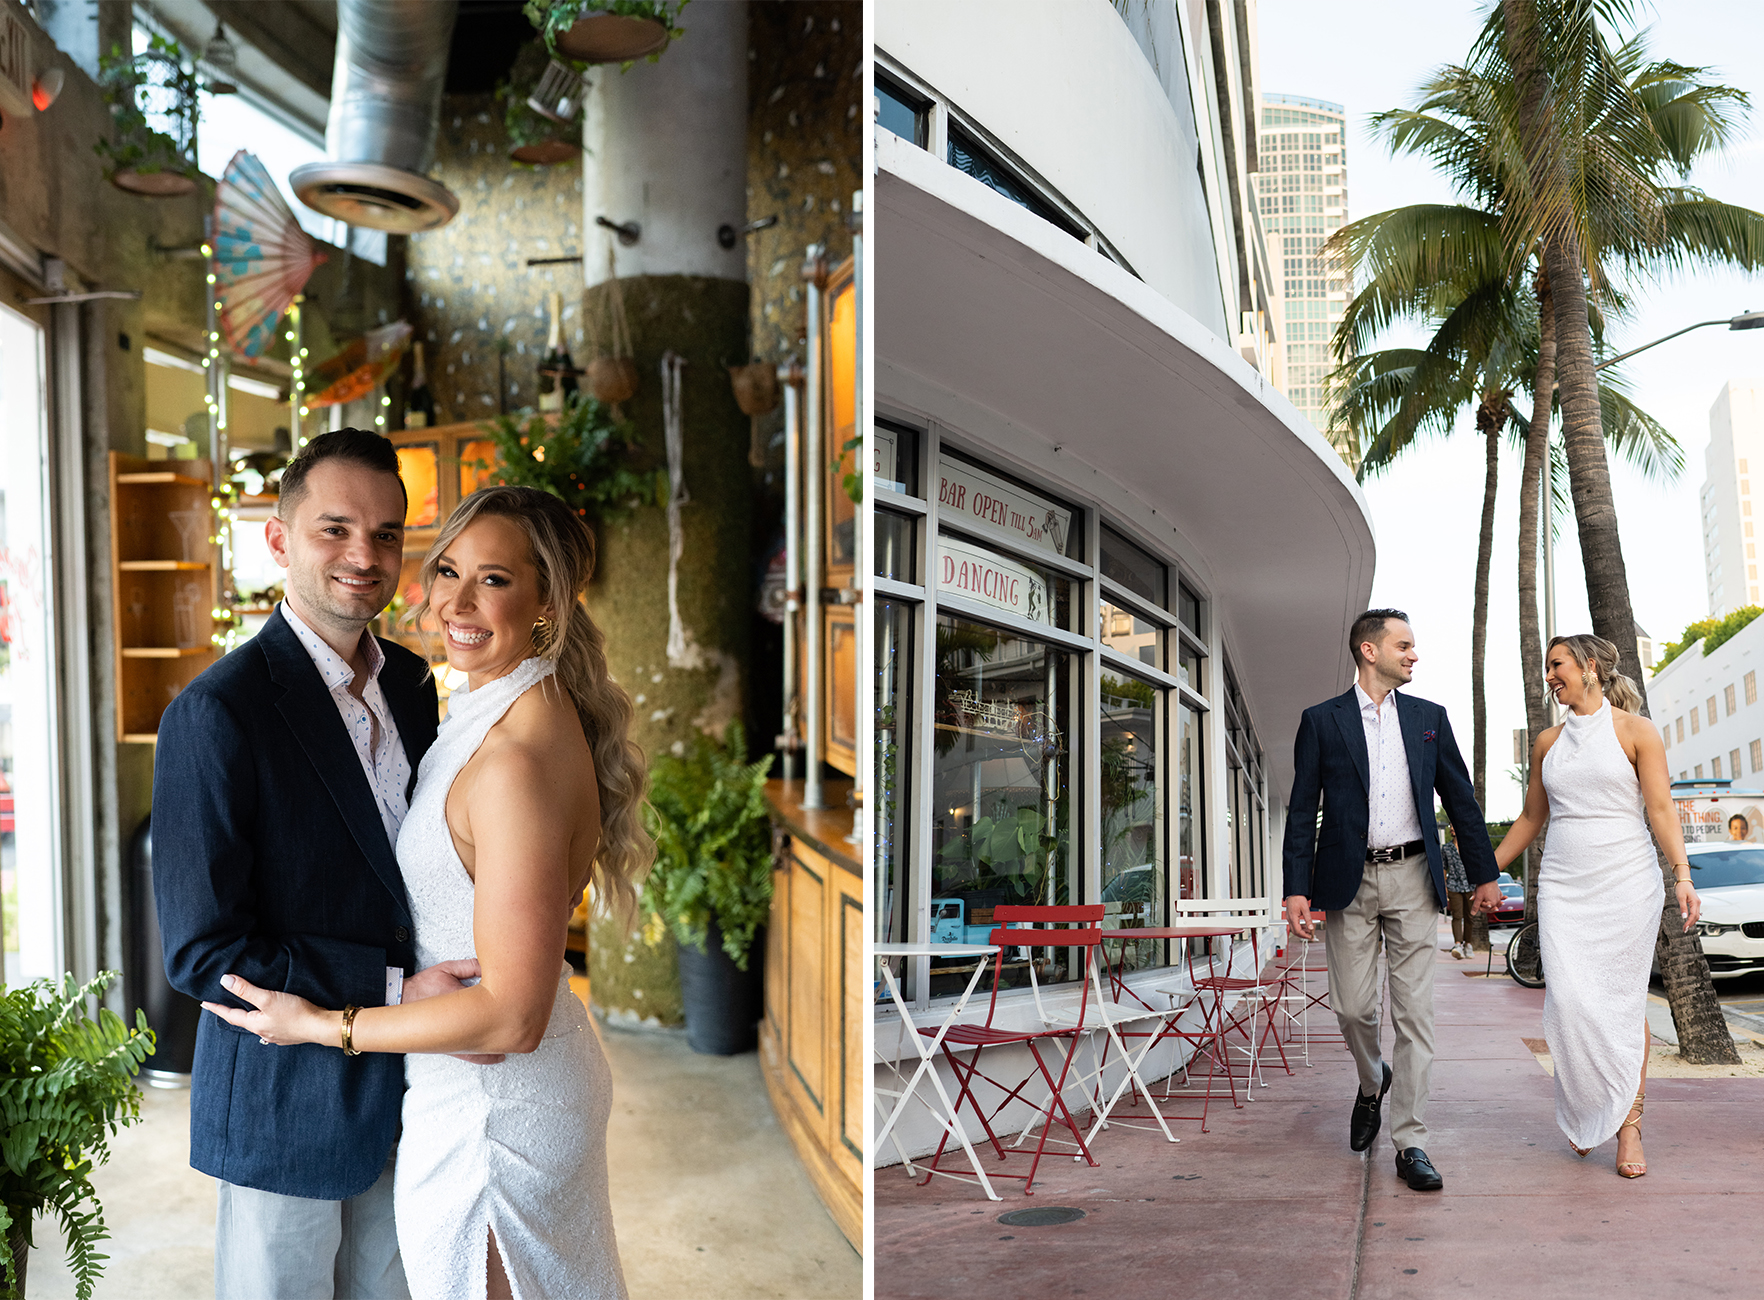 Shaina and Andrew look great together in outfits that match the vibe of their city rehearsal dinner. 